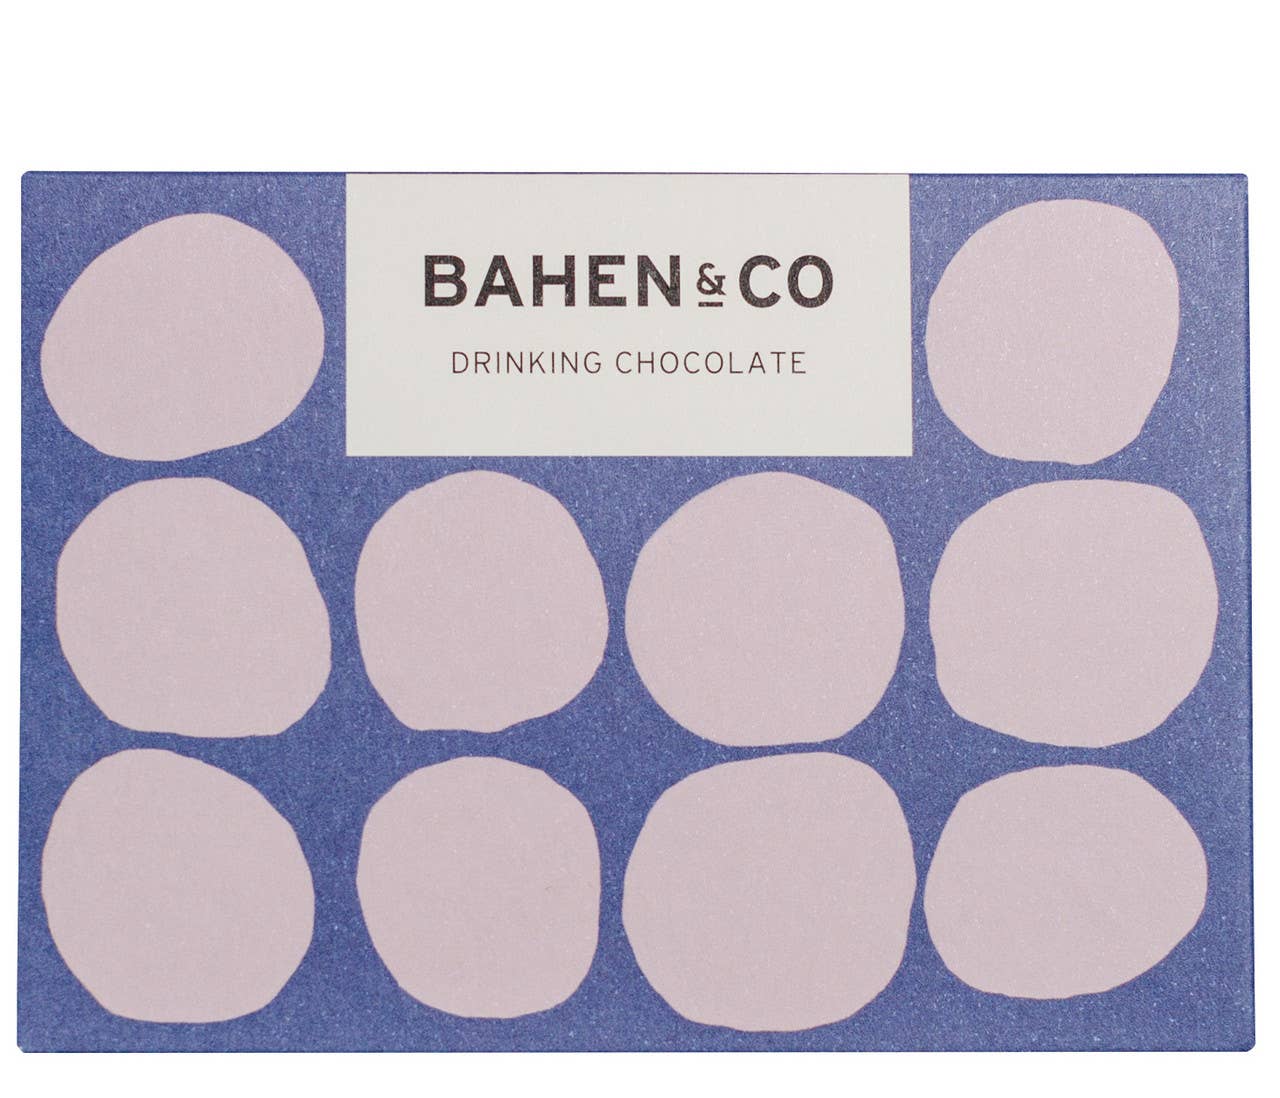 Bahen & Co - Classic Cacao Drinking Chocolate Bar